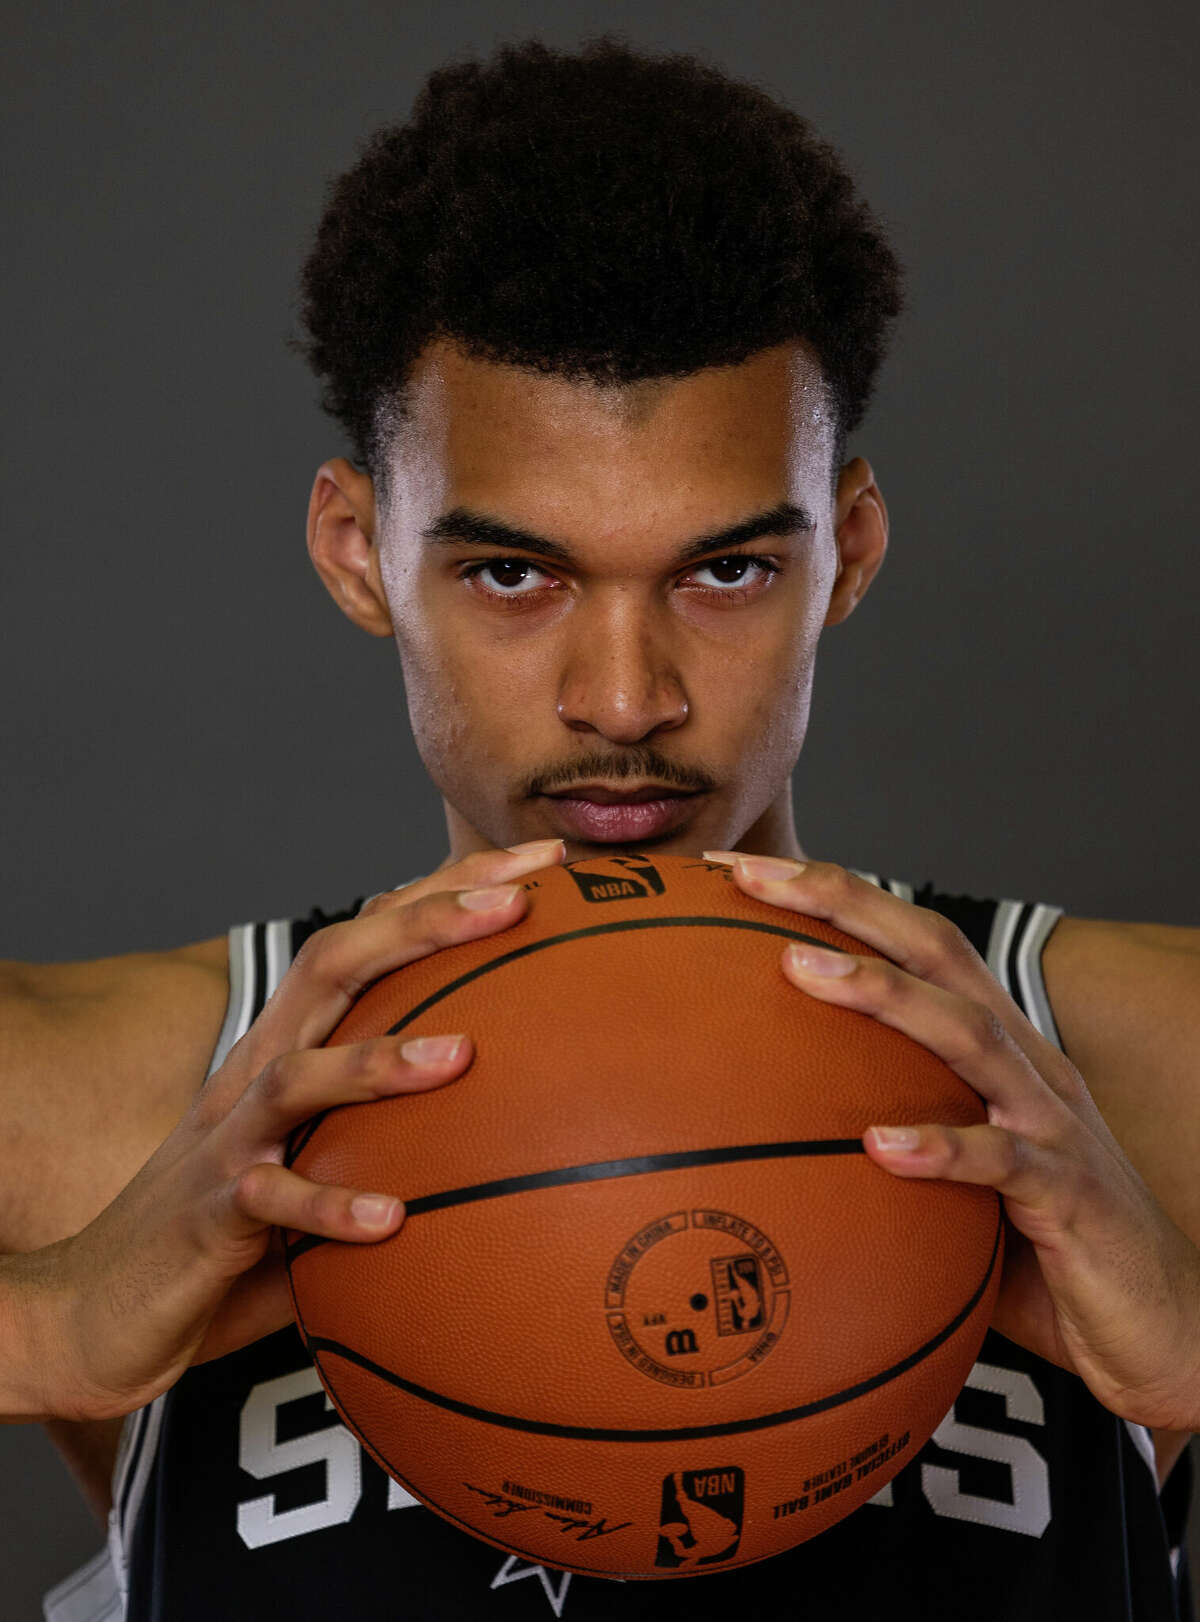 Behind the scenes at NBA's Rookie Photo Shoot